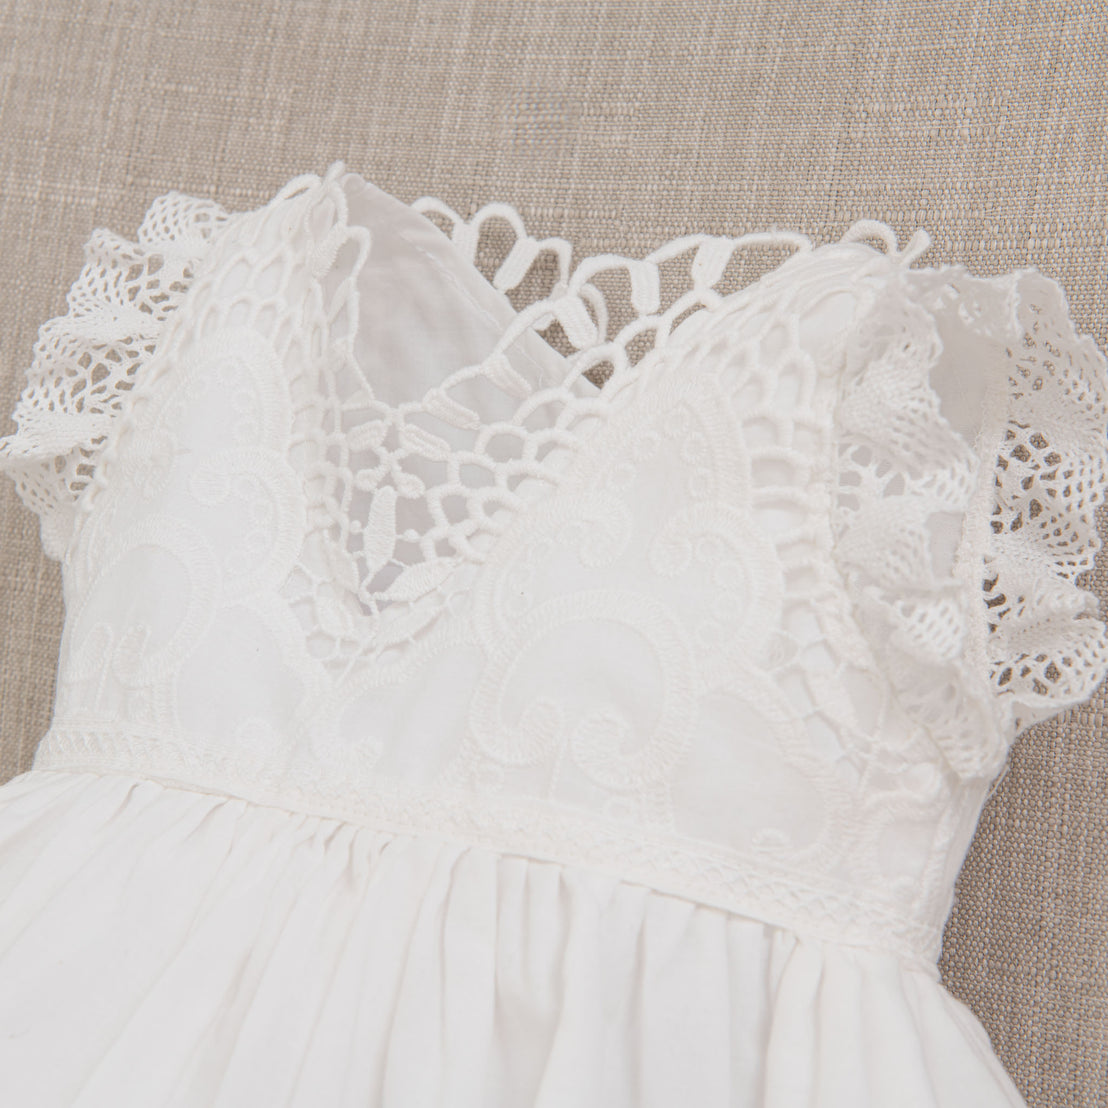 Close-up detail of the scalloped edge cotton lace of the lily christening romper dress bodice top